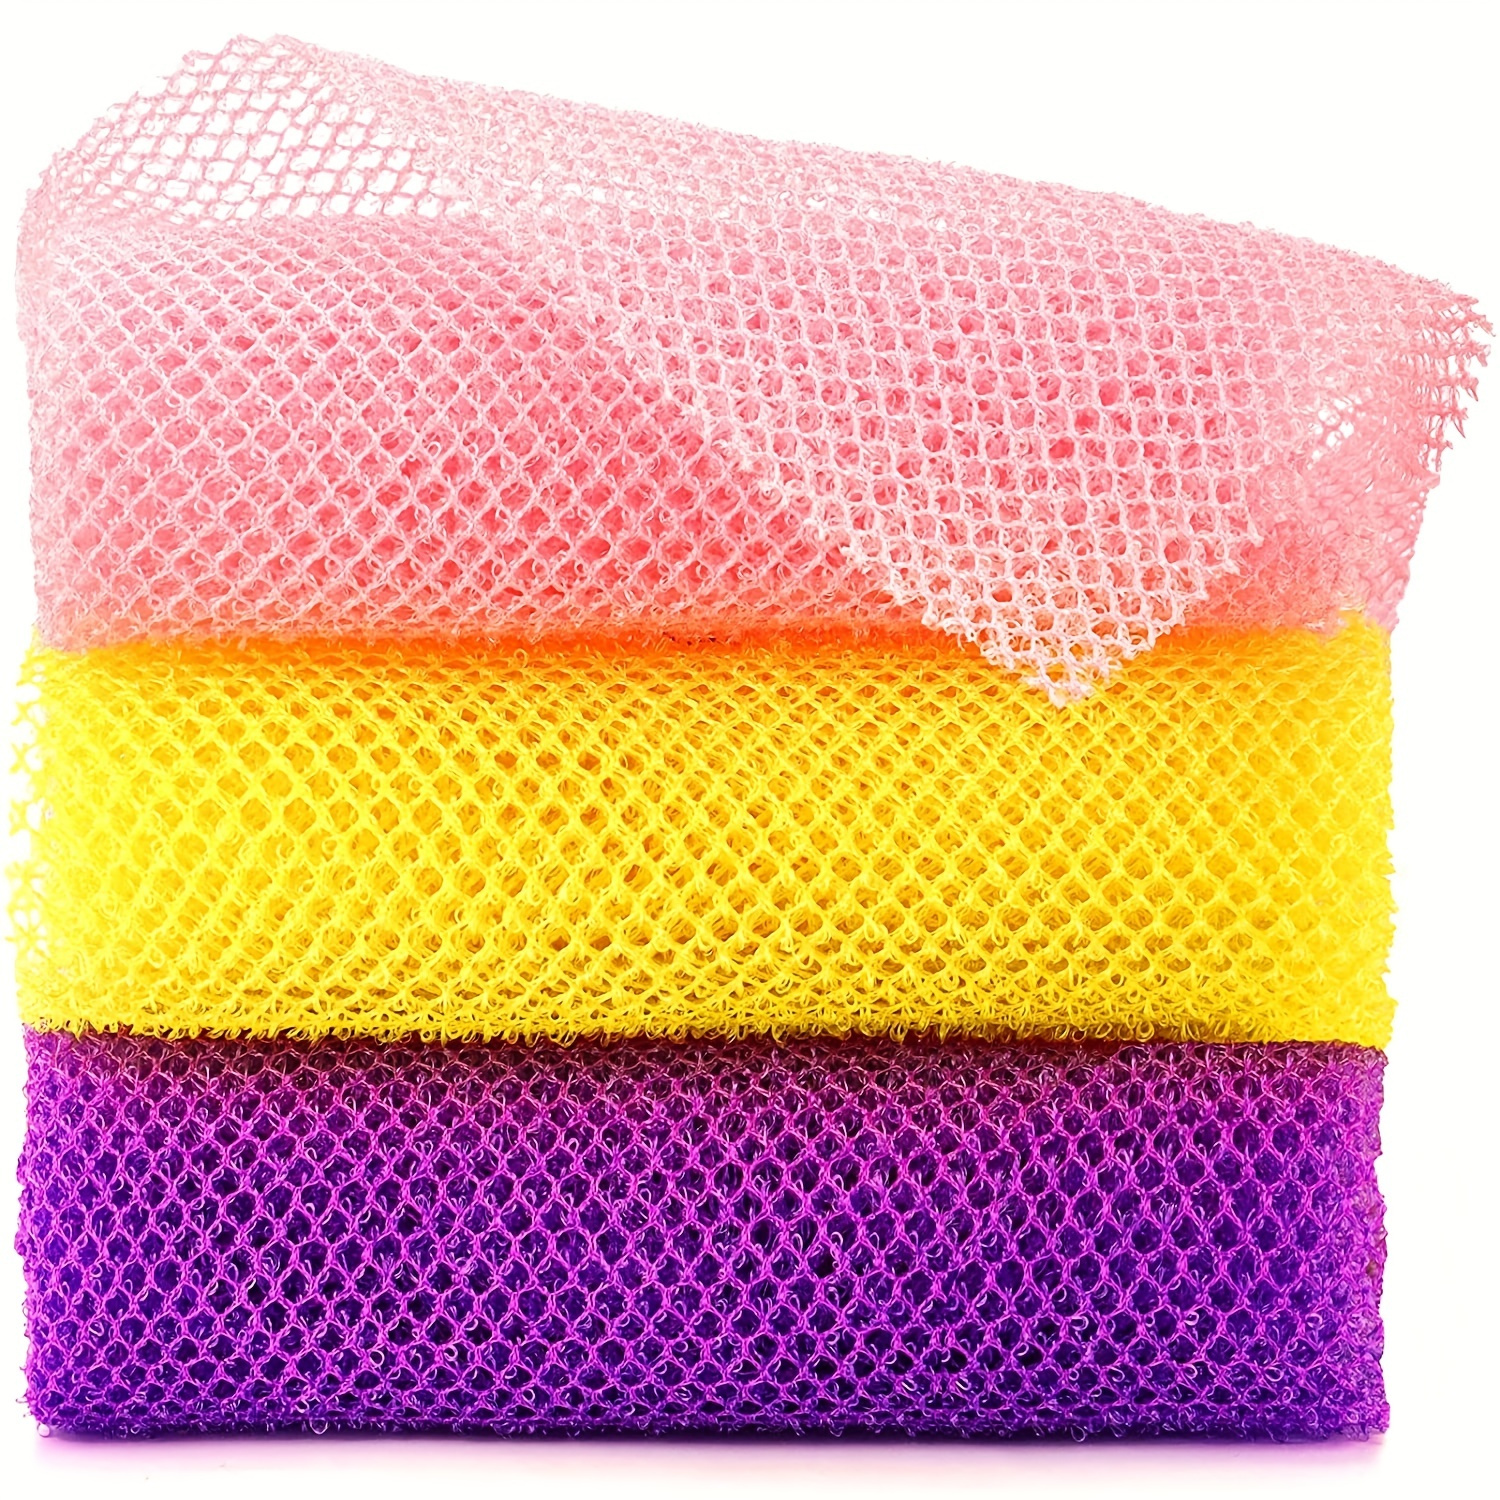 

3 Pcs Exfoliating African Net Bath Sponge For Daily Skin Smoothing And Scrubbing